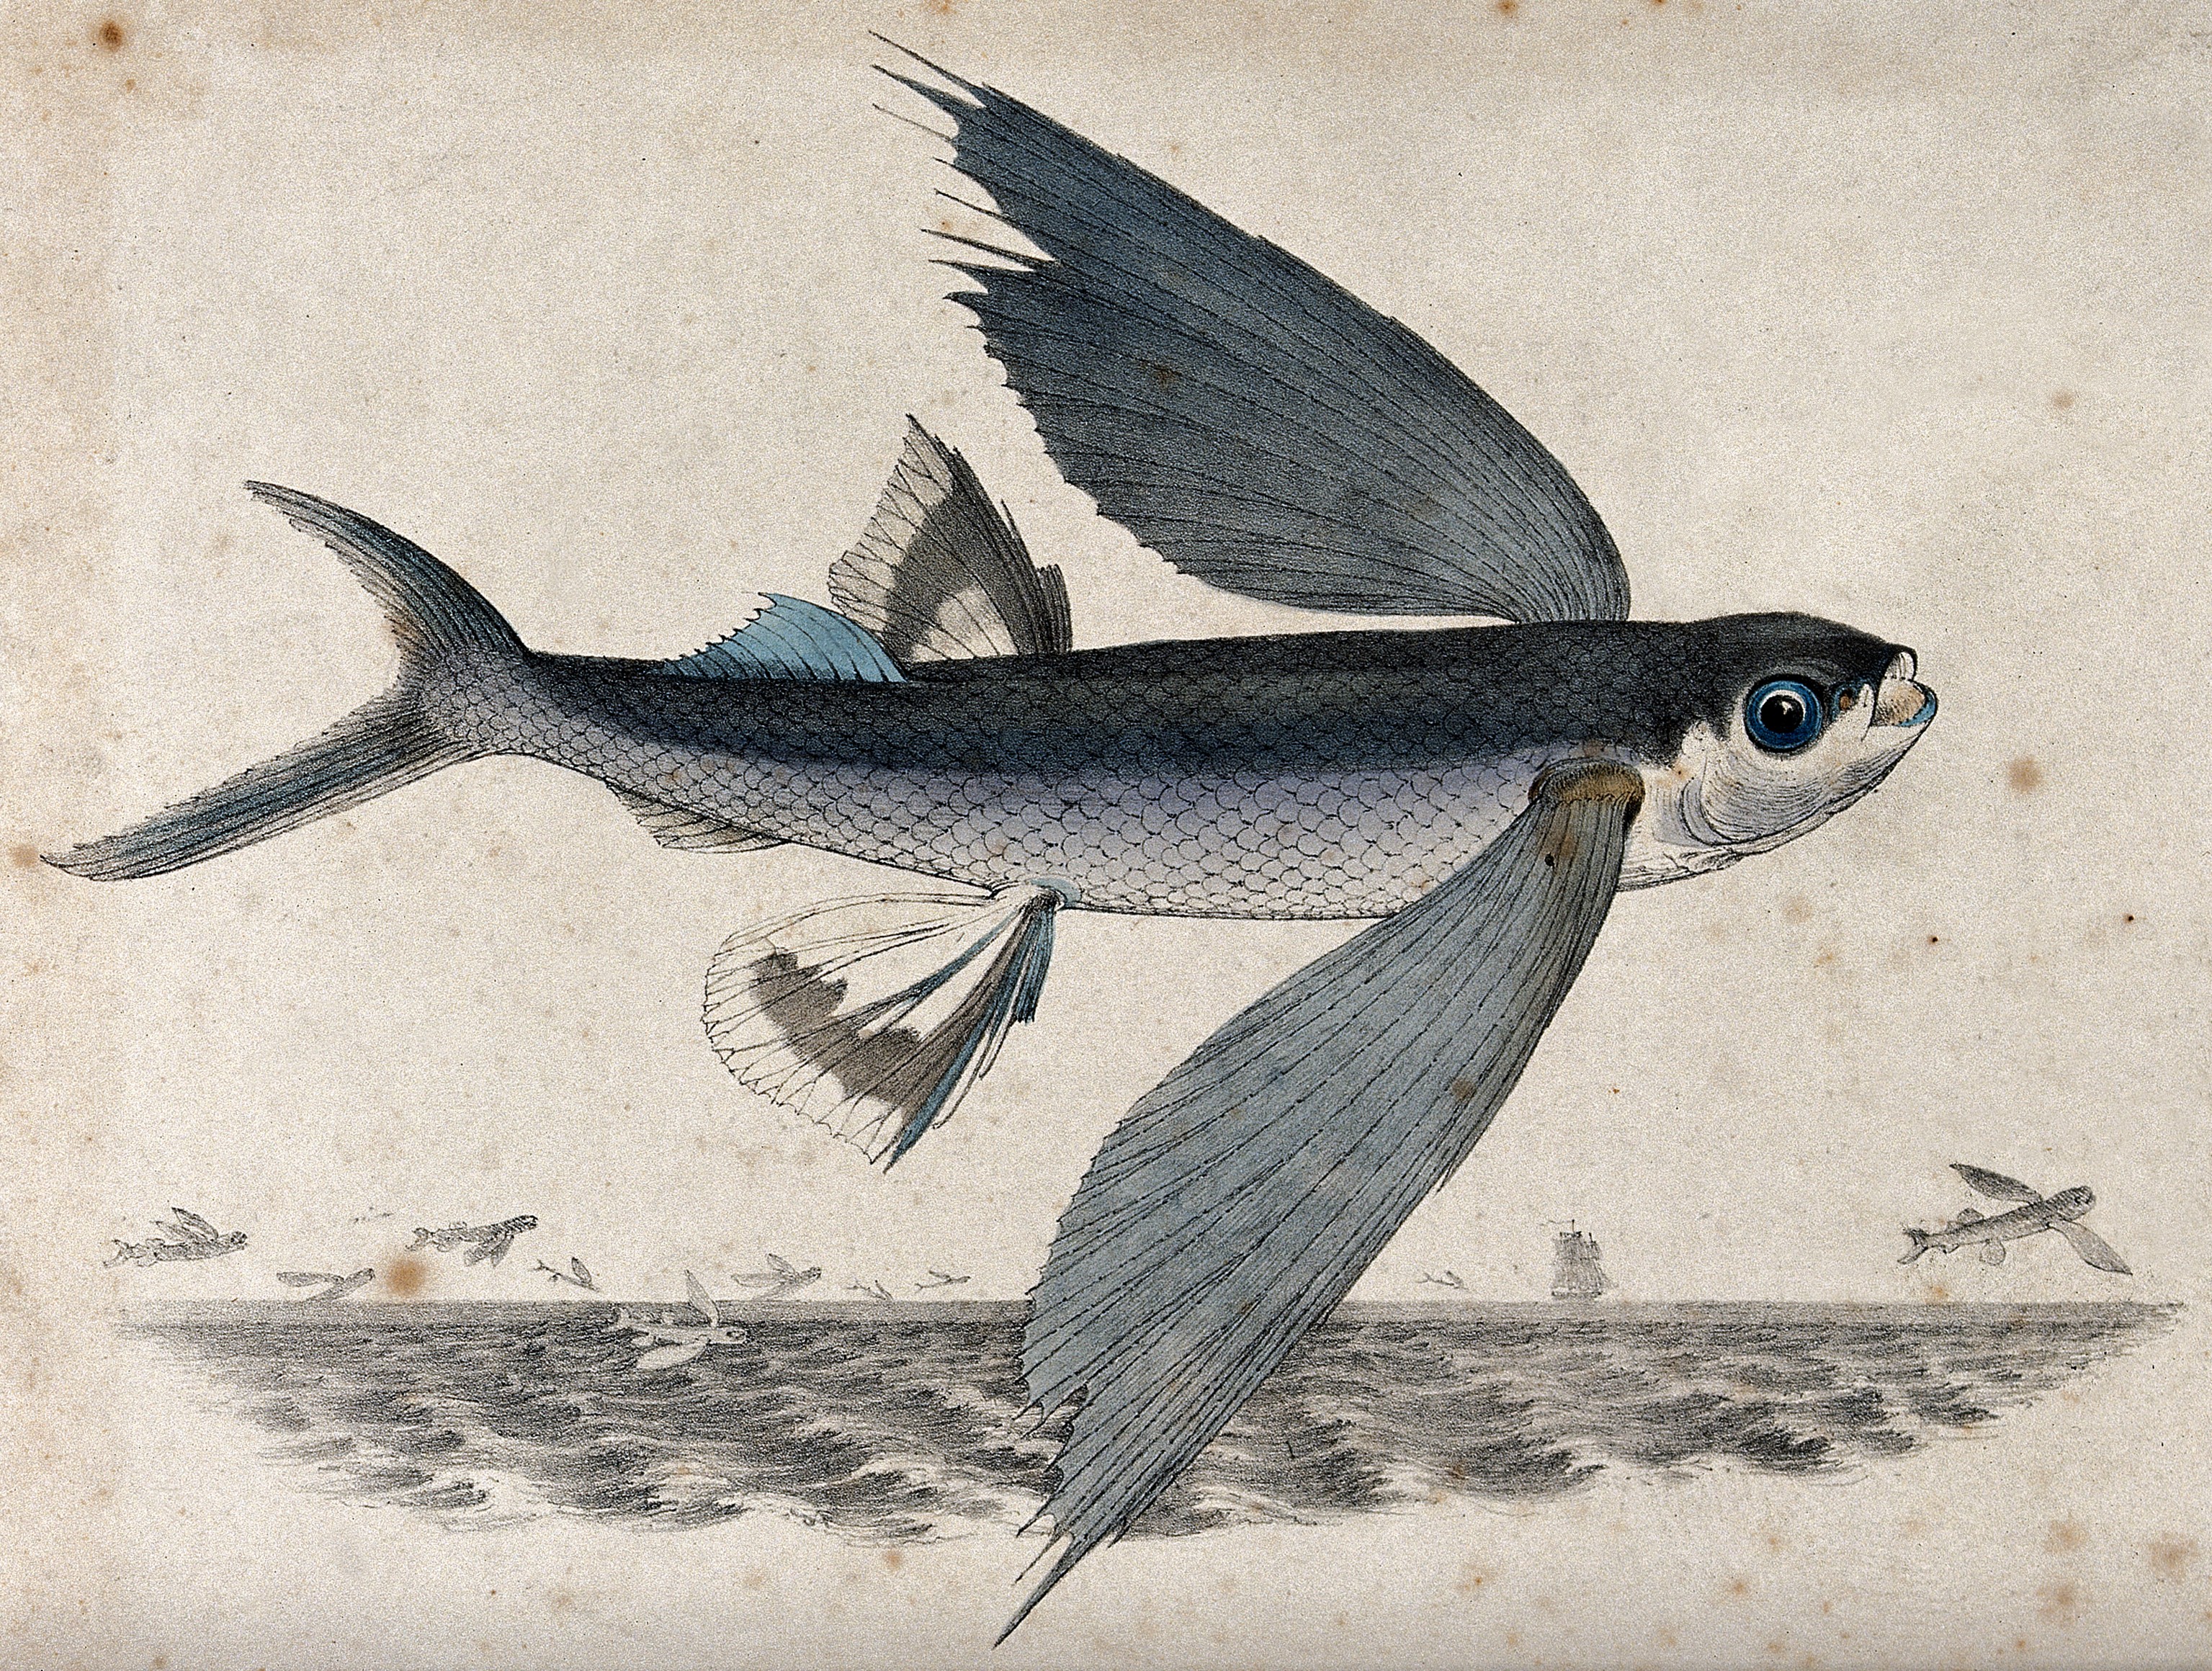 A flying fish shown flying over water. Coloured lithograph b Wellcome V0022106